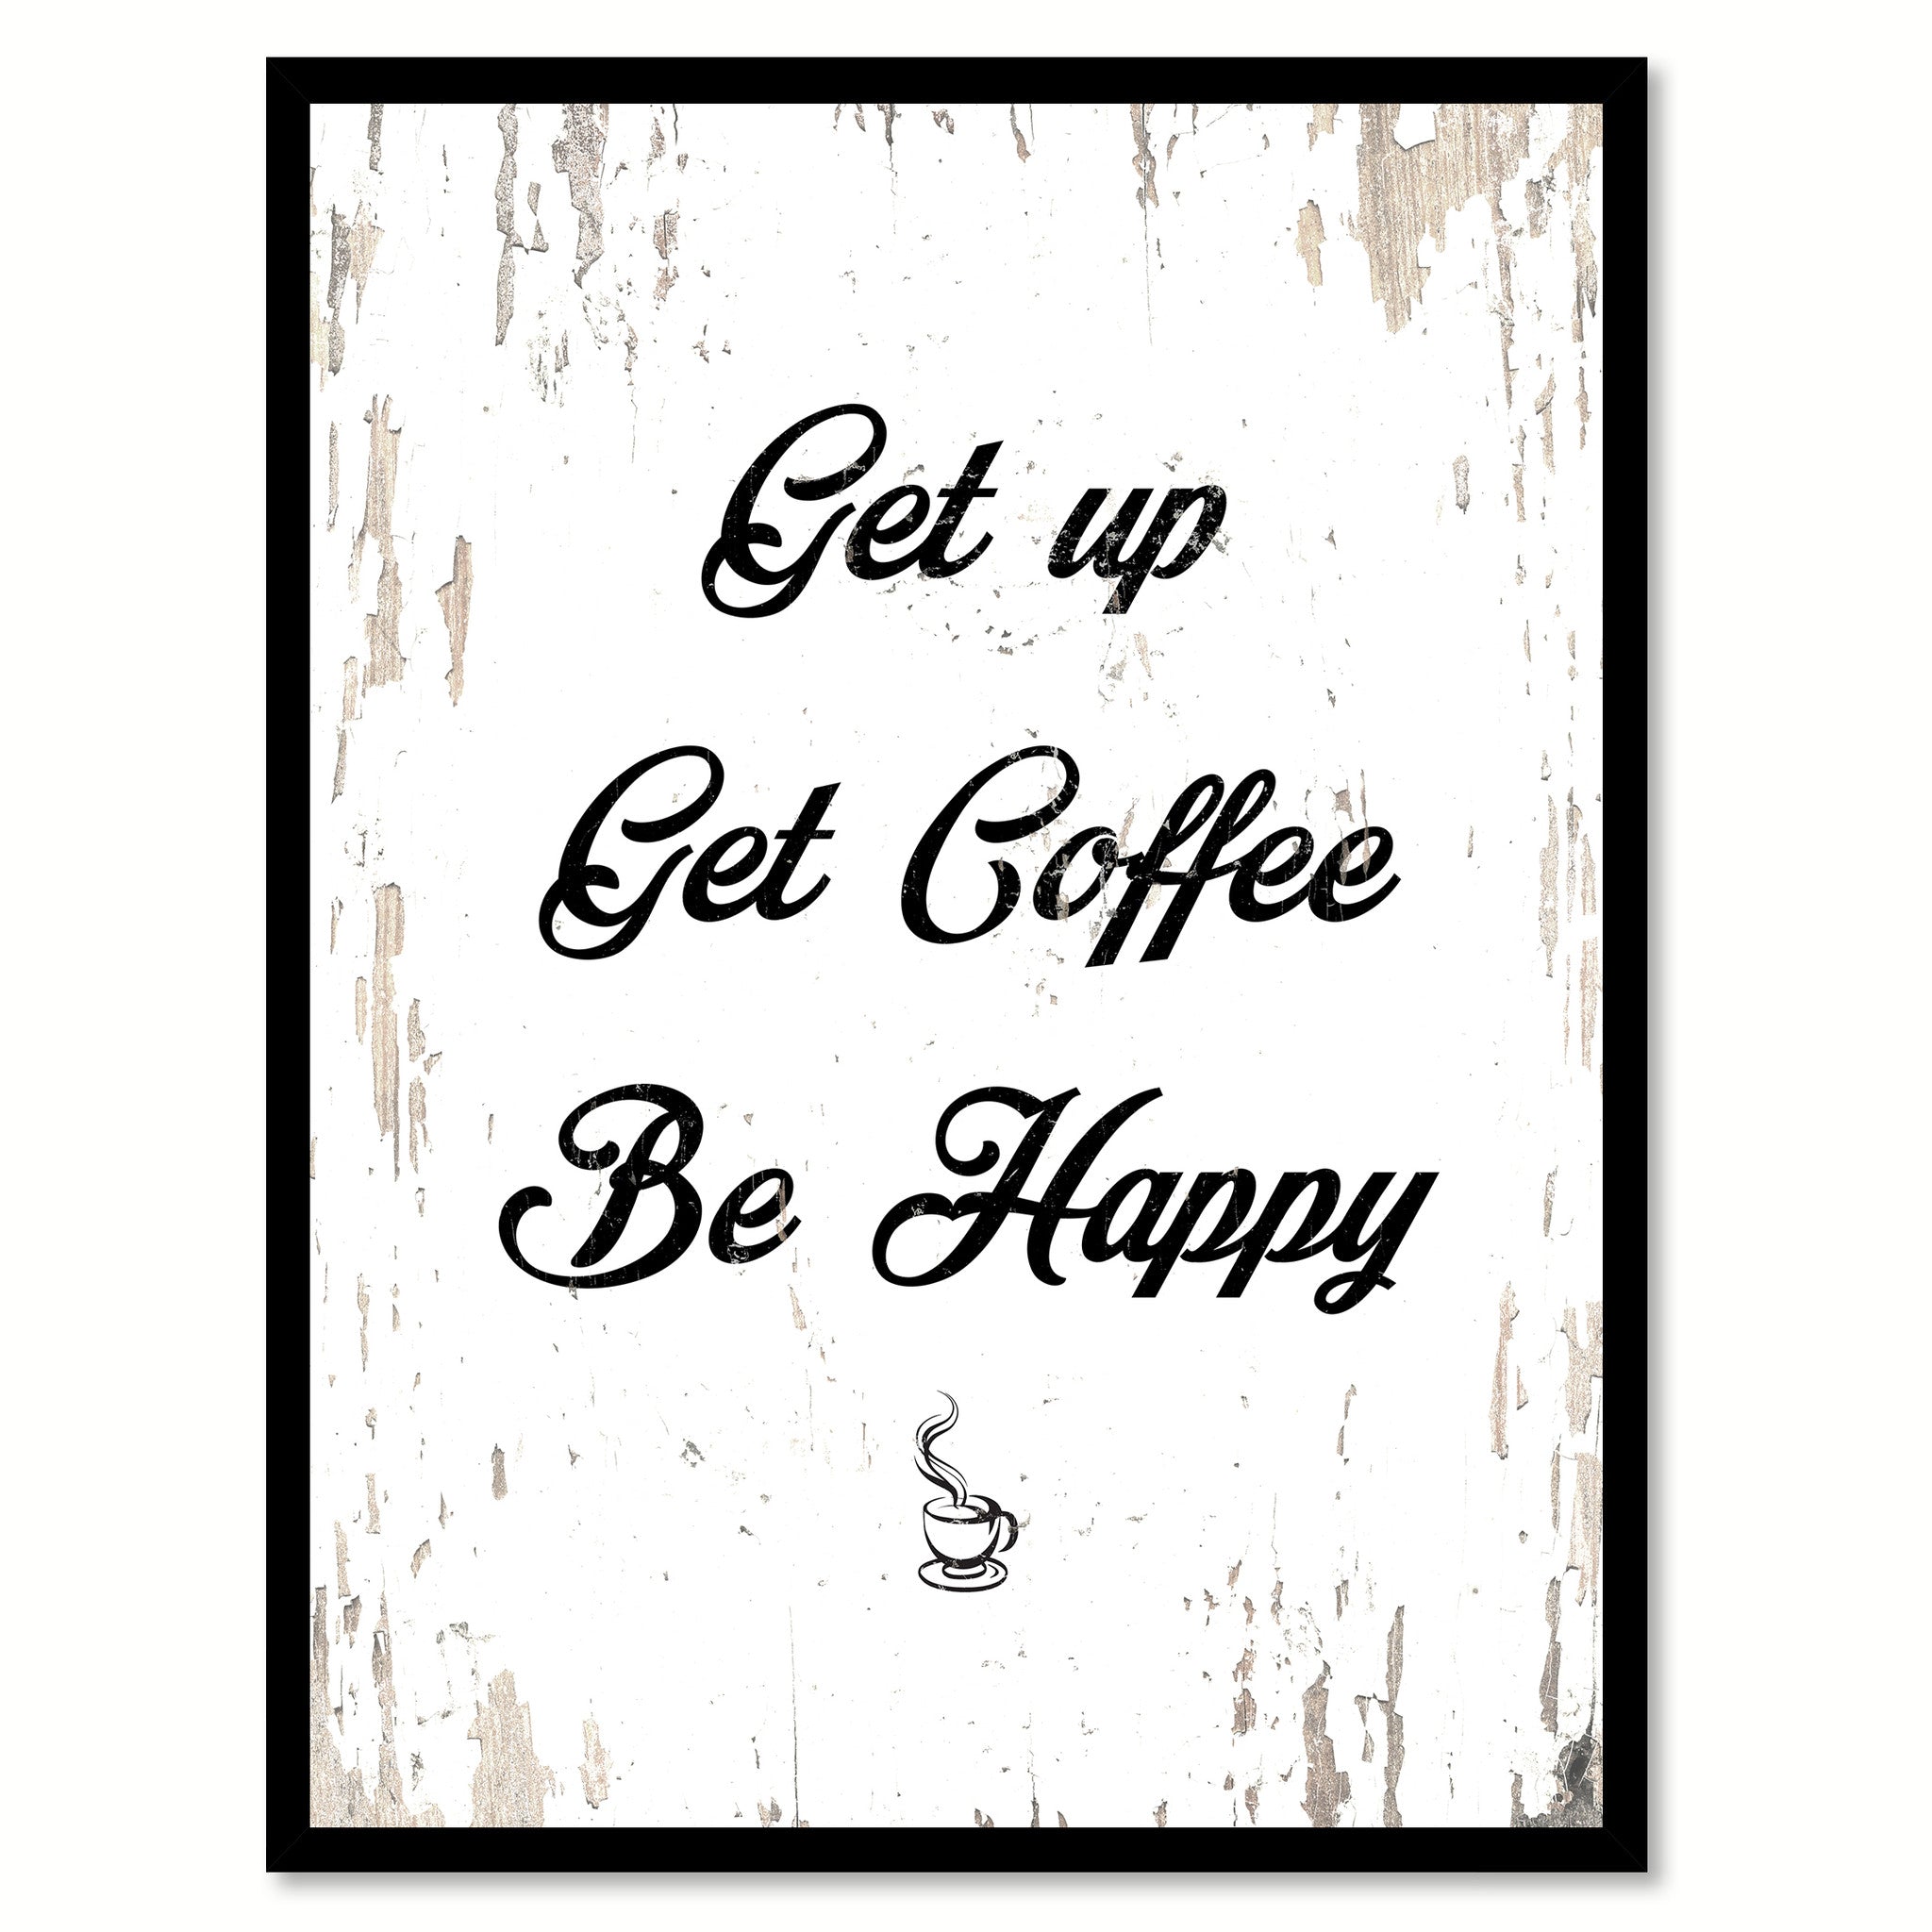 Get Up Get Coffee Be Happy Quote Saying Canvas Print with Picture Frame